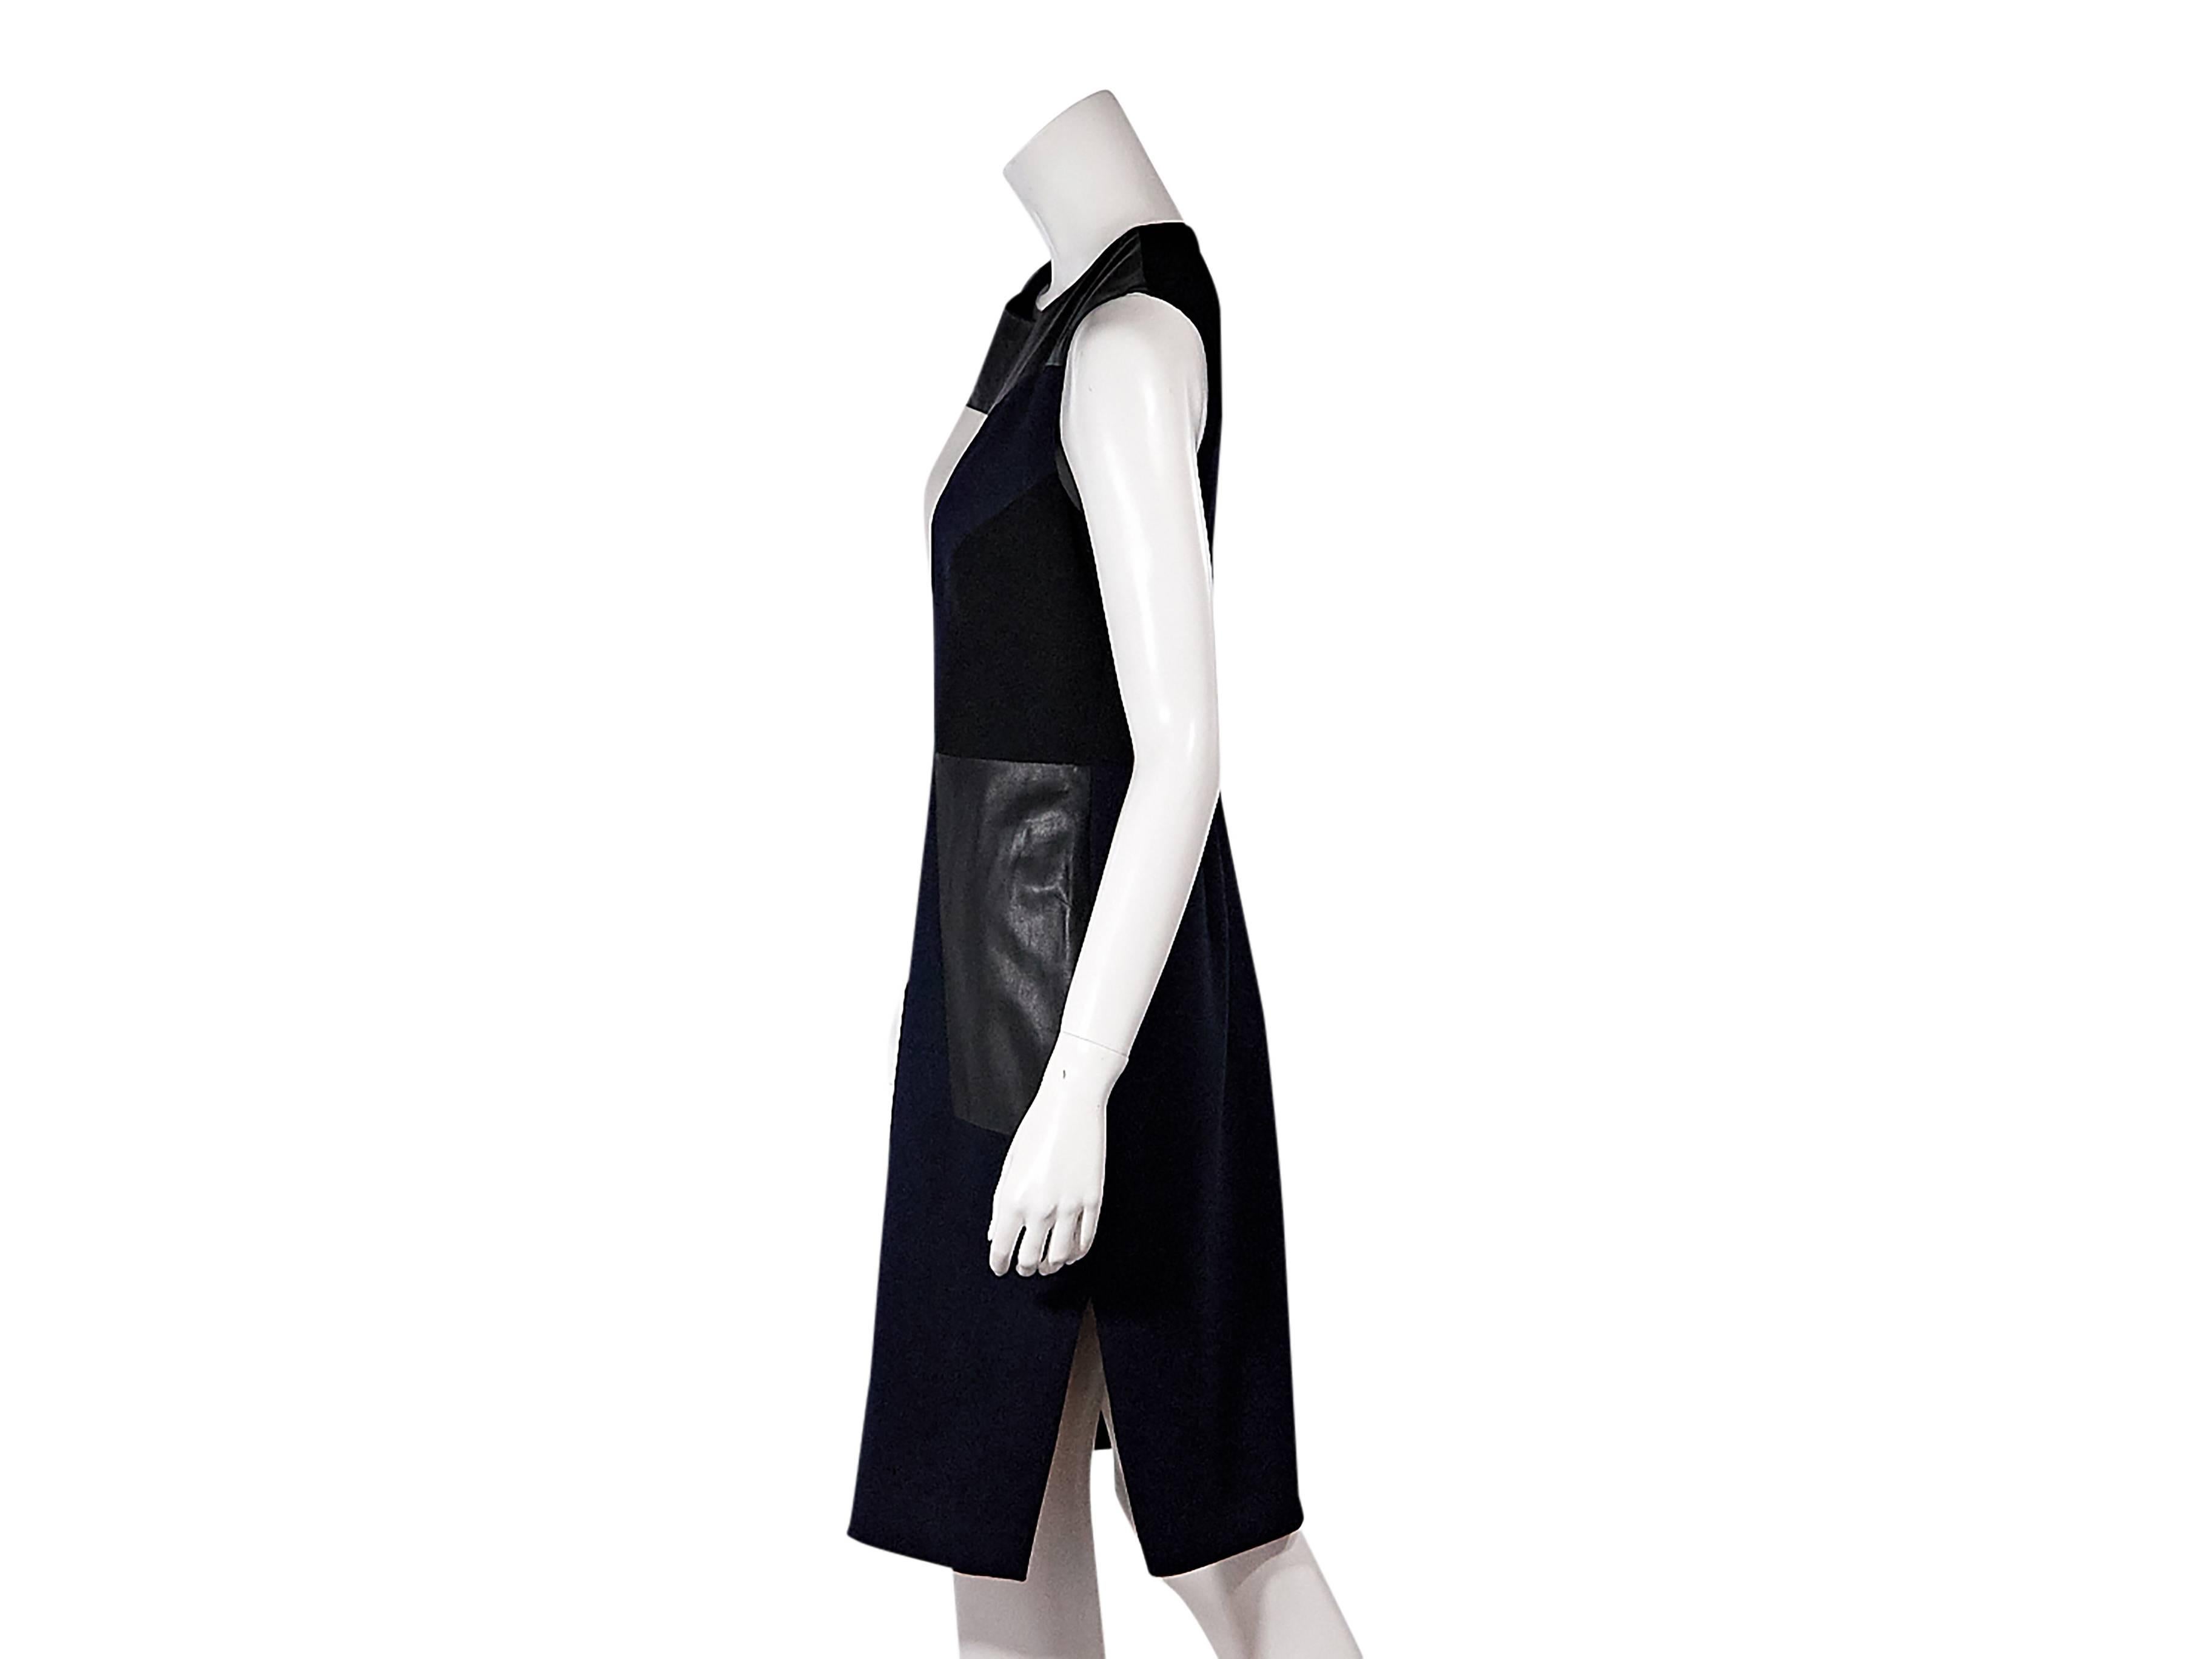 Product details:  Navy, black and white colorblock sheath dress by Prabal Gurung.  Accented with leather panels.  Jewelneck.  Sleeveles.  Concealed back zip closure.  Size small
Condition: Pre-owned. Very good.

Est. Retail $ 990.00